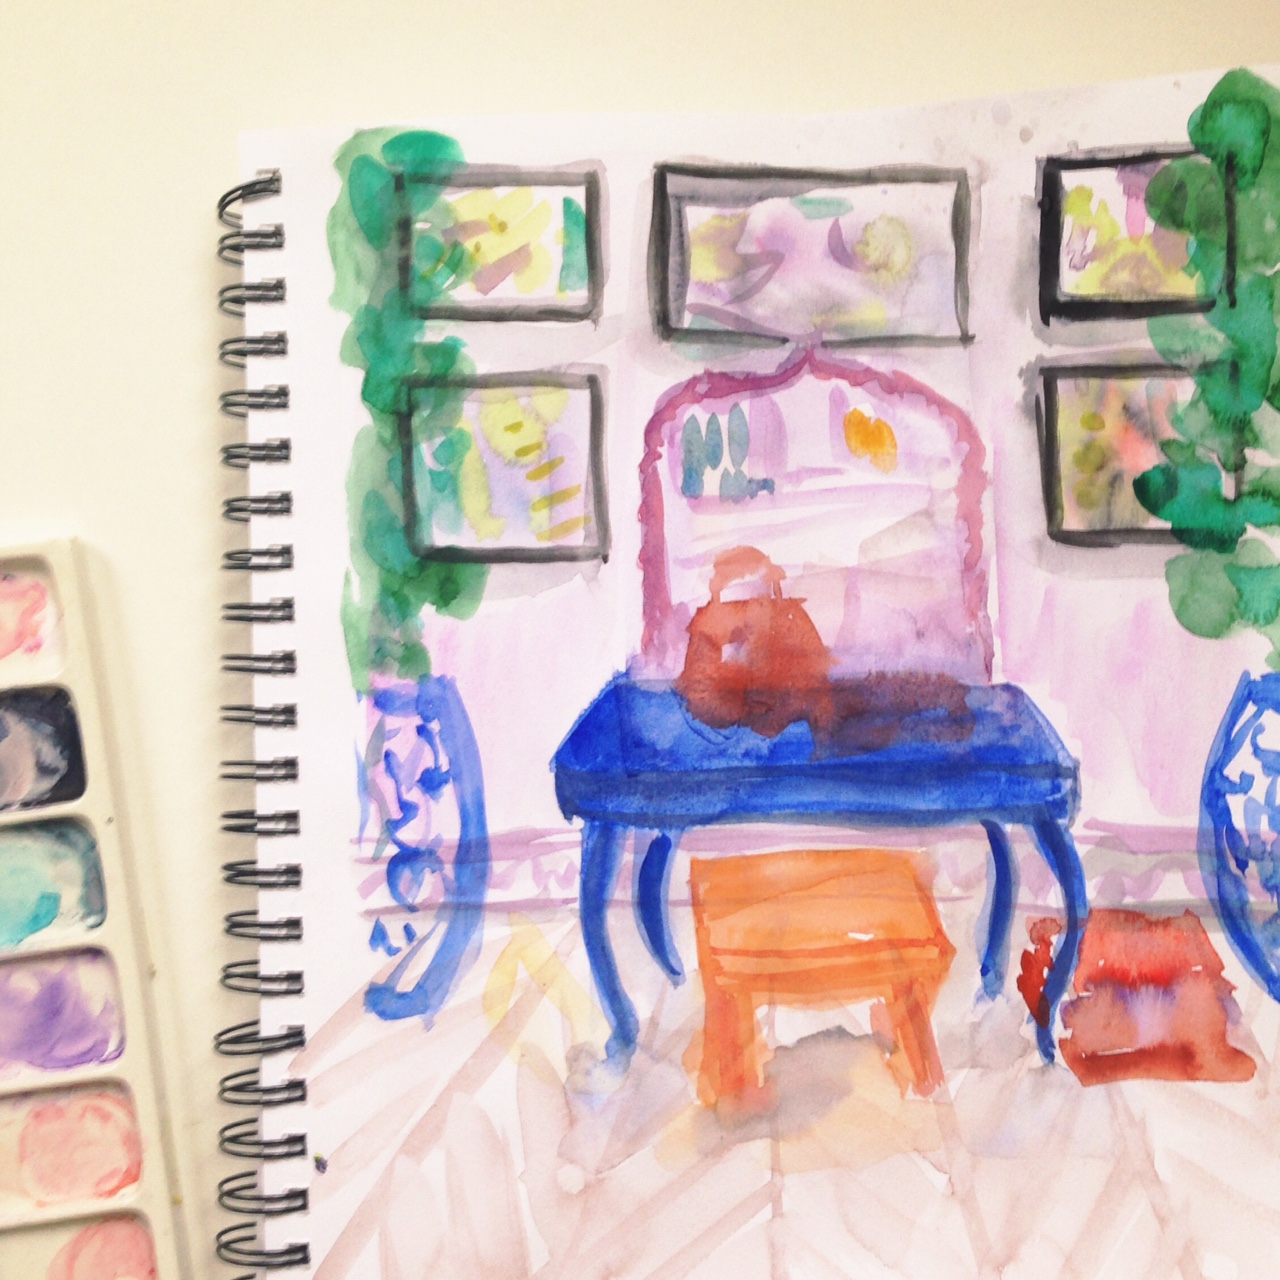 Marissa-Huber-The100DayProject-Watercolor-Interiors